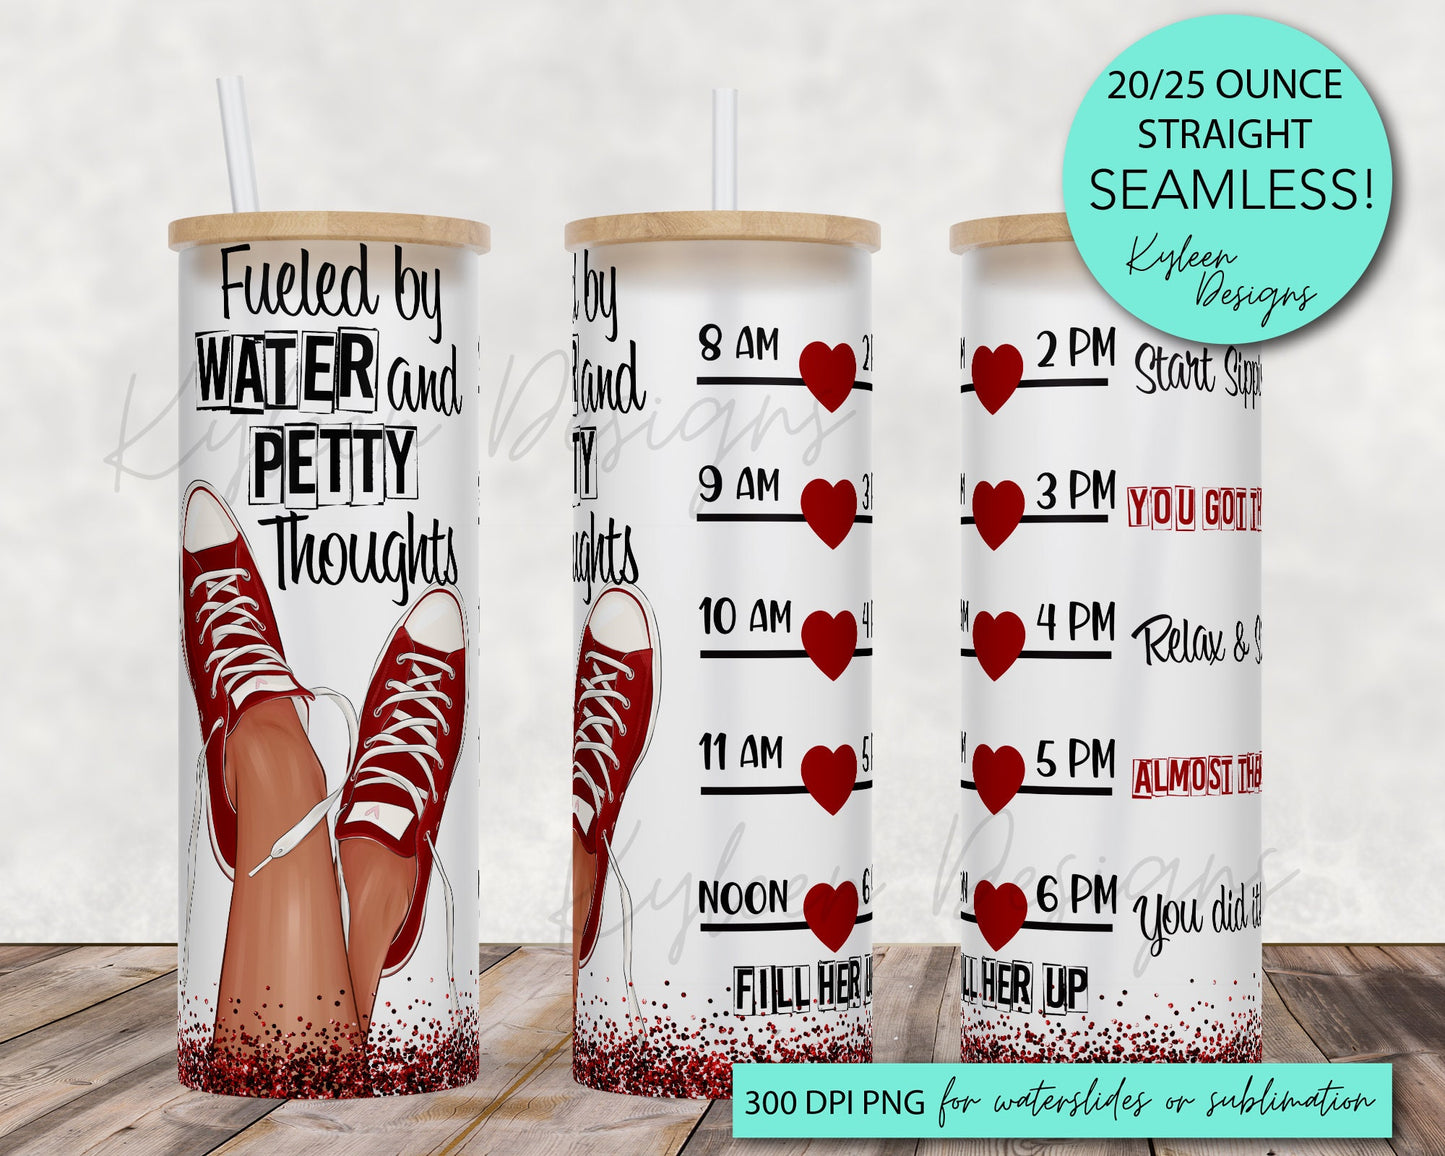 25 oz glass tumbler running on water and petty thoughts Water tracker 20/25 ounce wrap for sublimation, waterslide High res PNG digital file